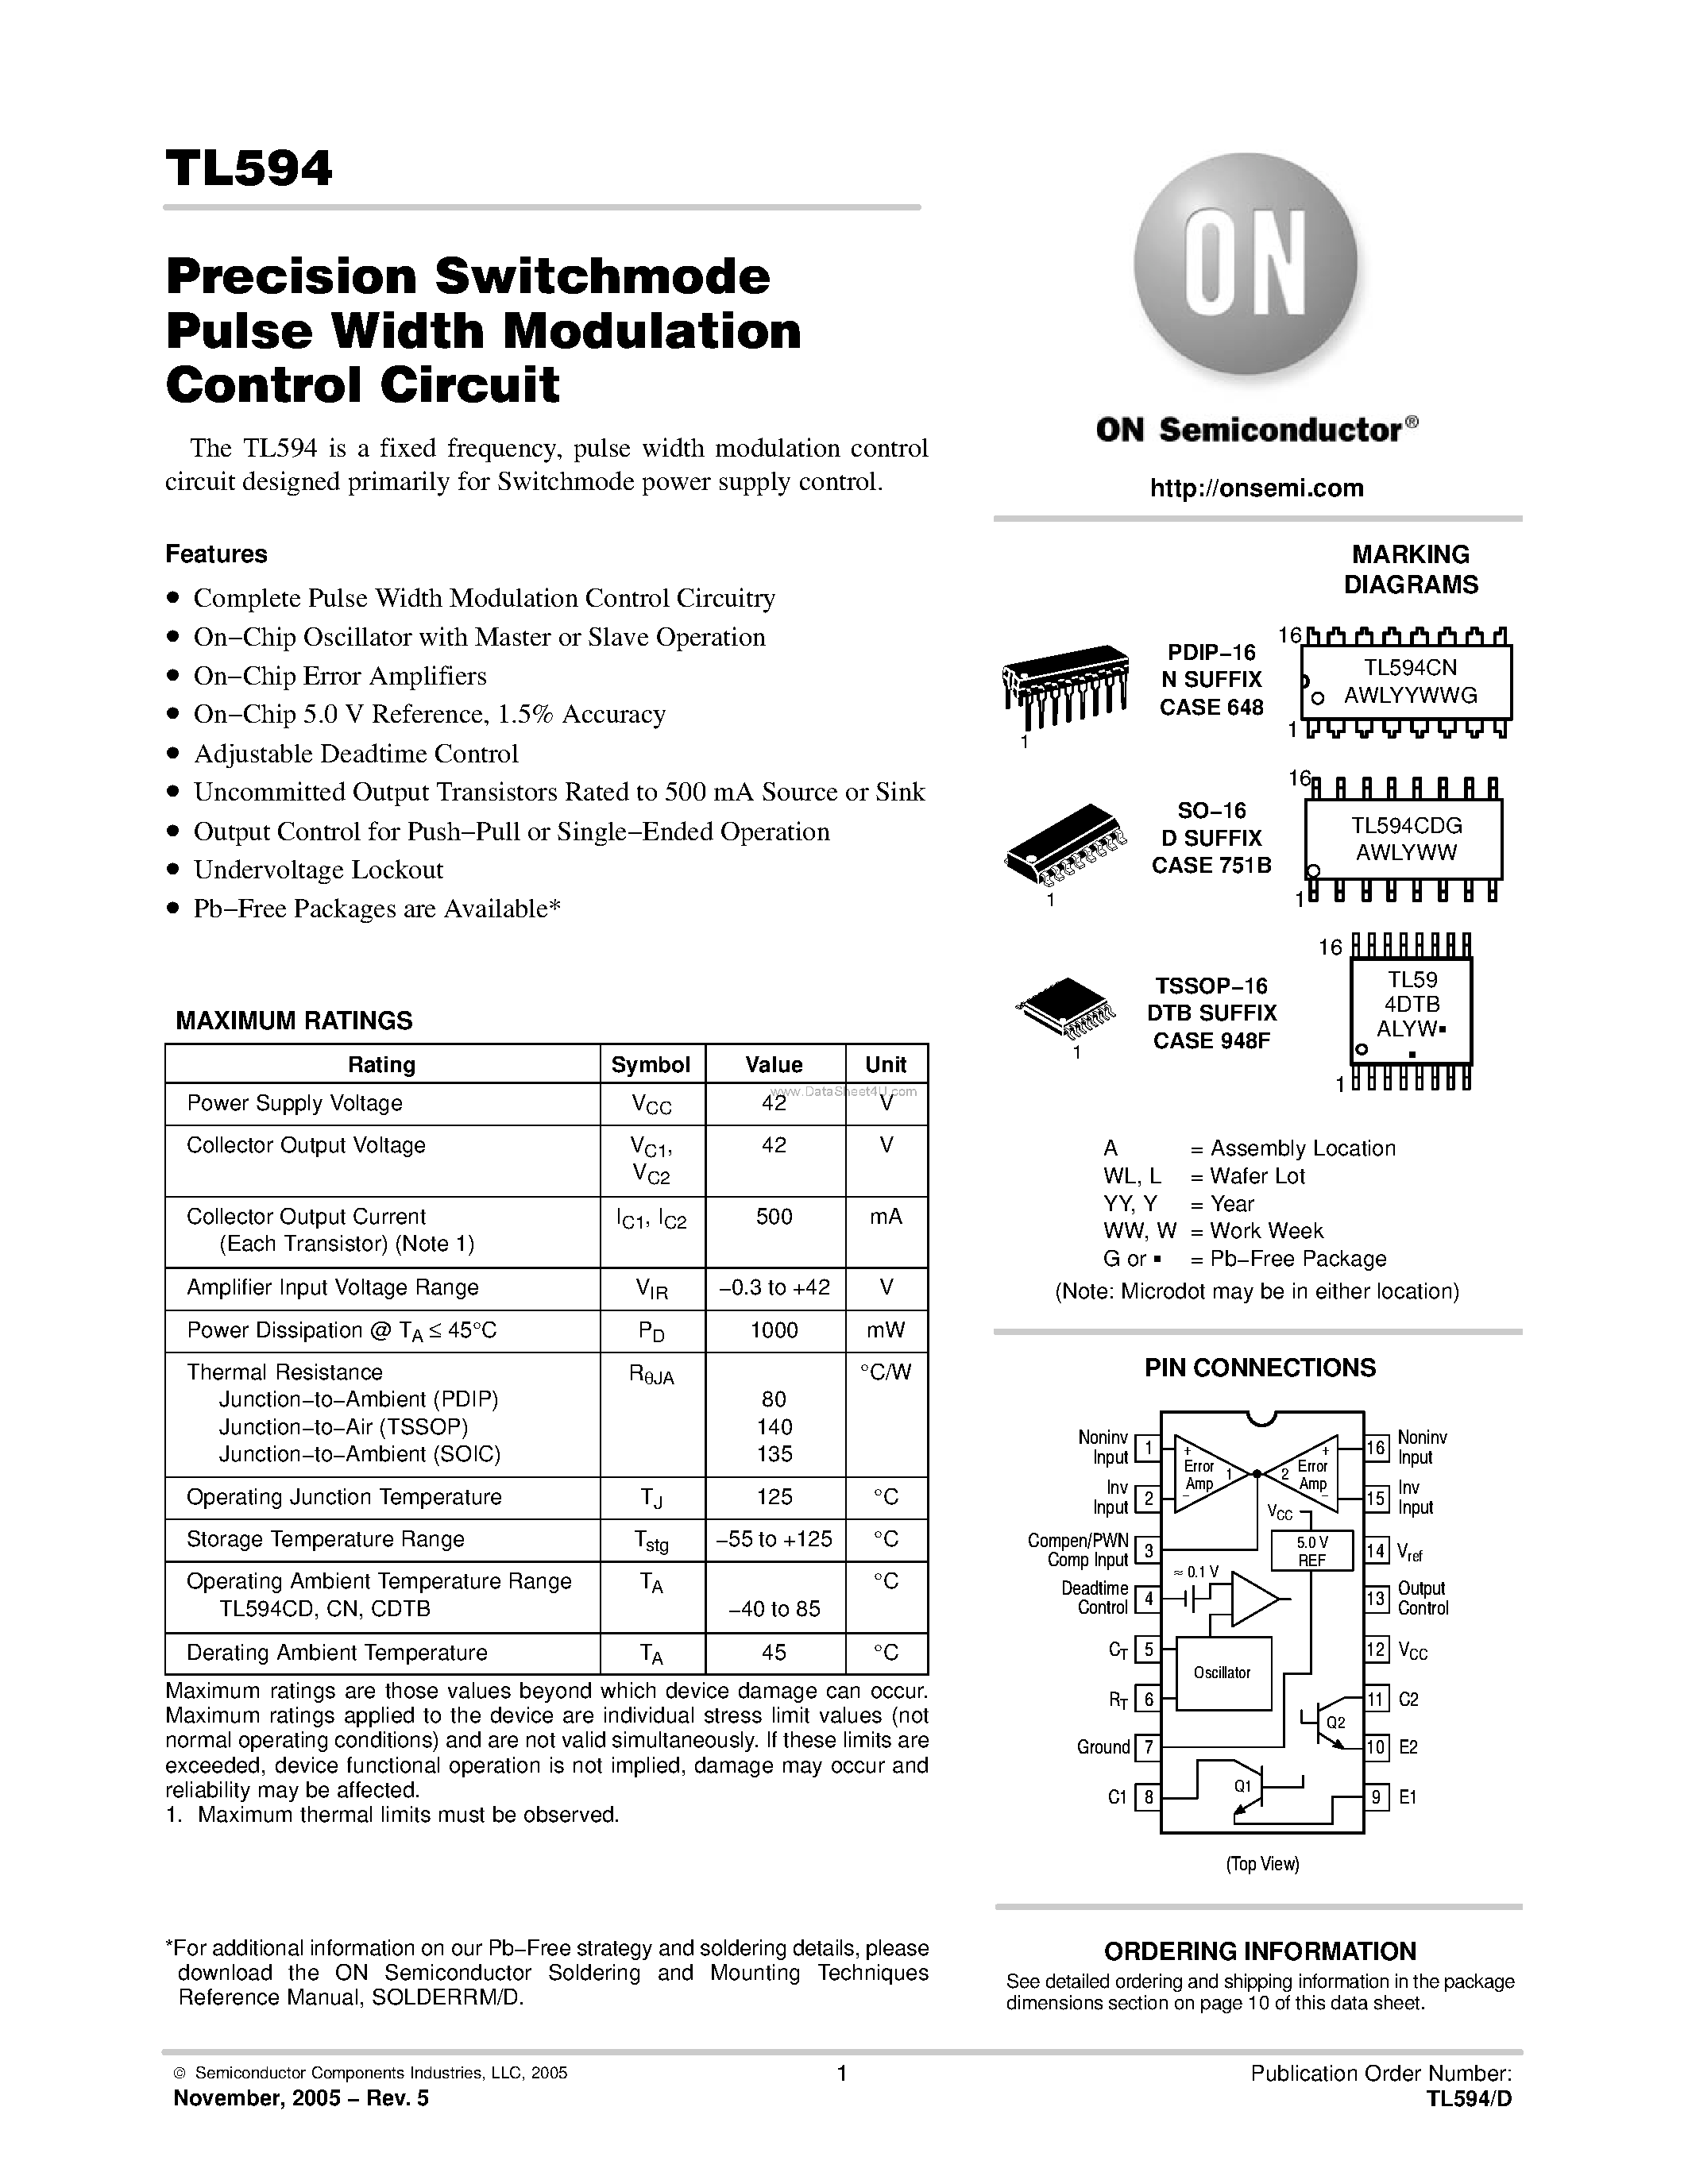 Datasheet TL594 - PRECISION SWITCHMODE PULSE WIDTH MODULATION CONTROL CIRCUIT page 1